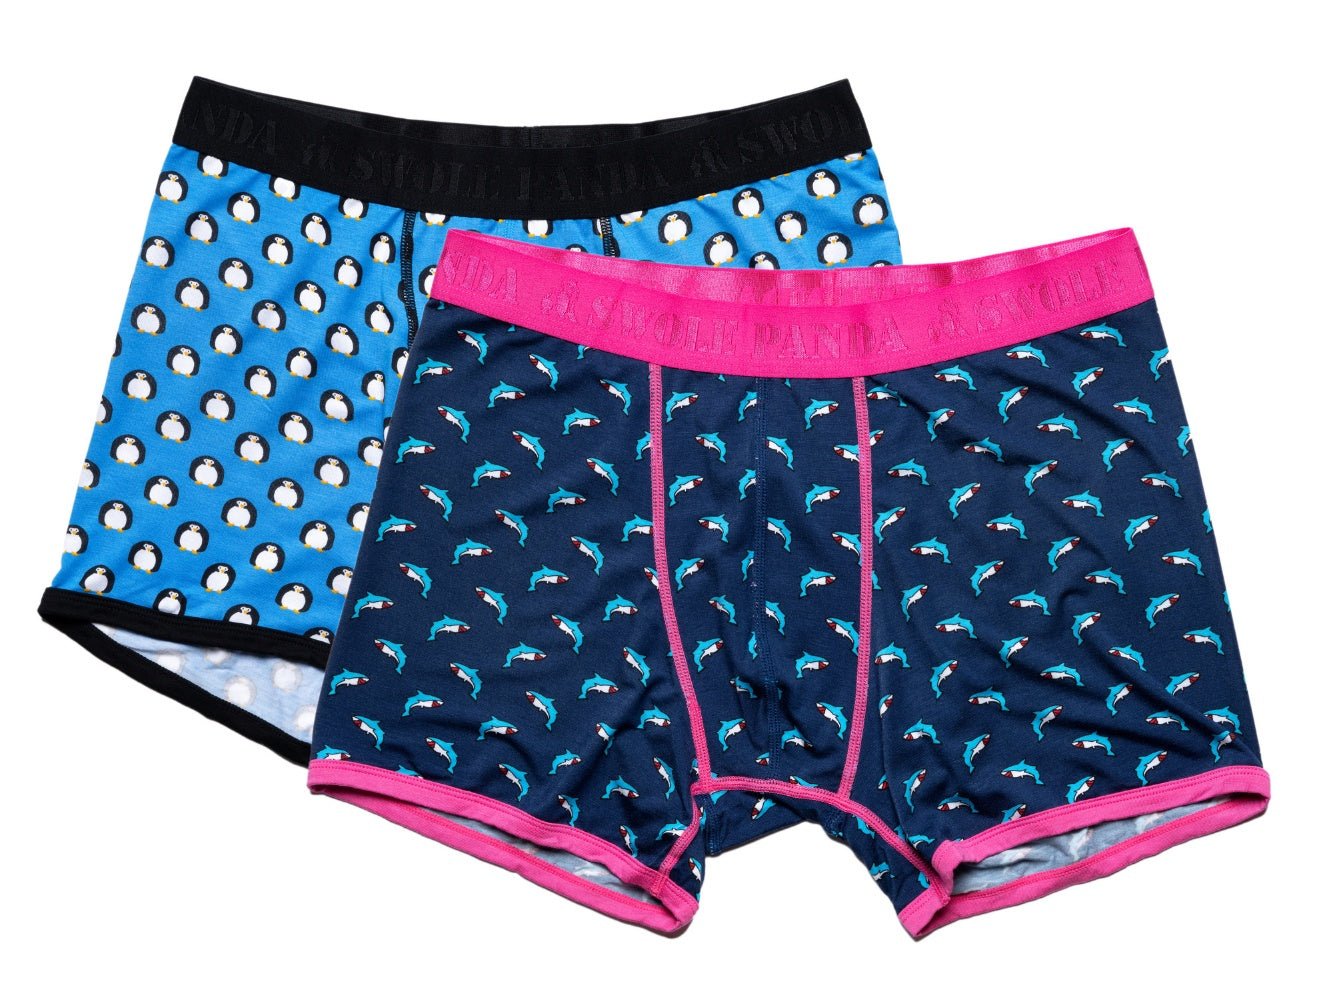 Bamboo Boxers 2 Pack - Penguins & Sharks